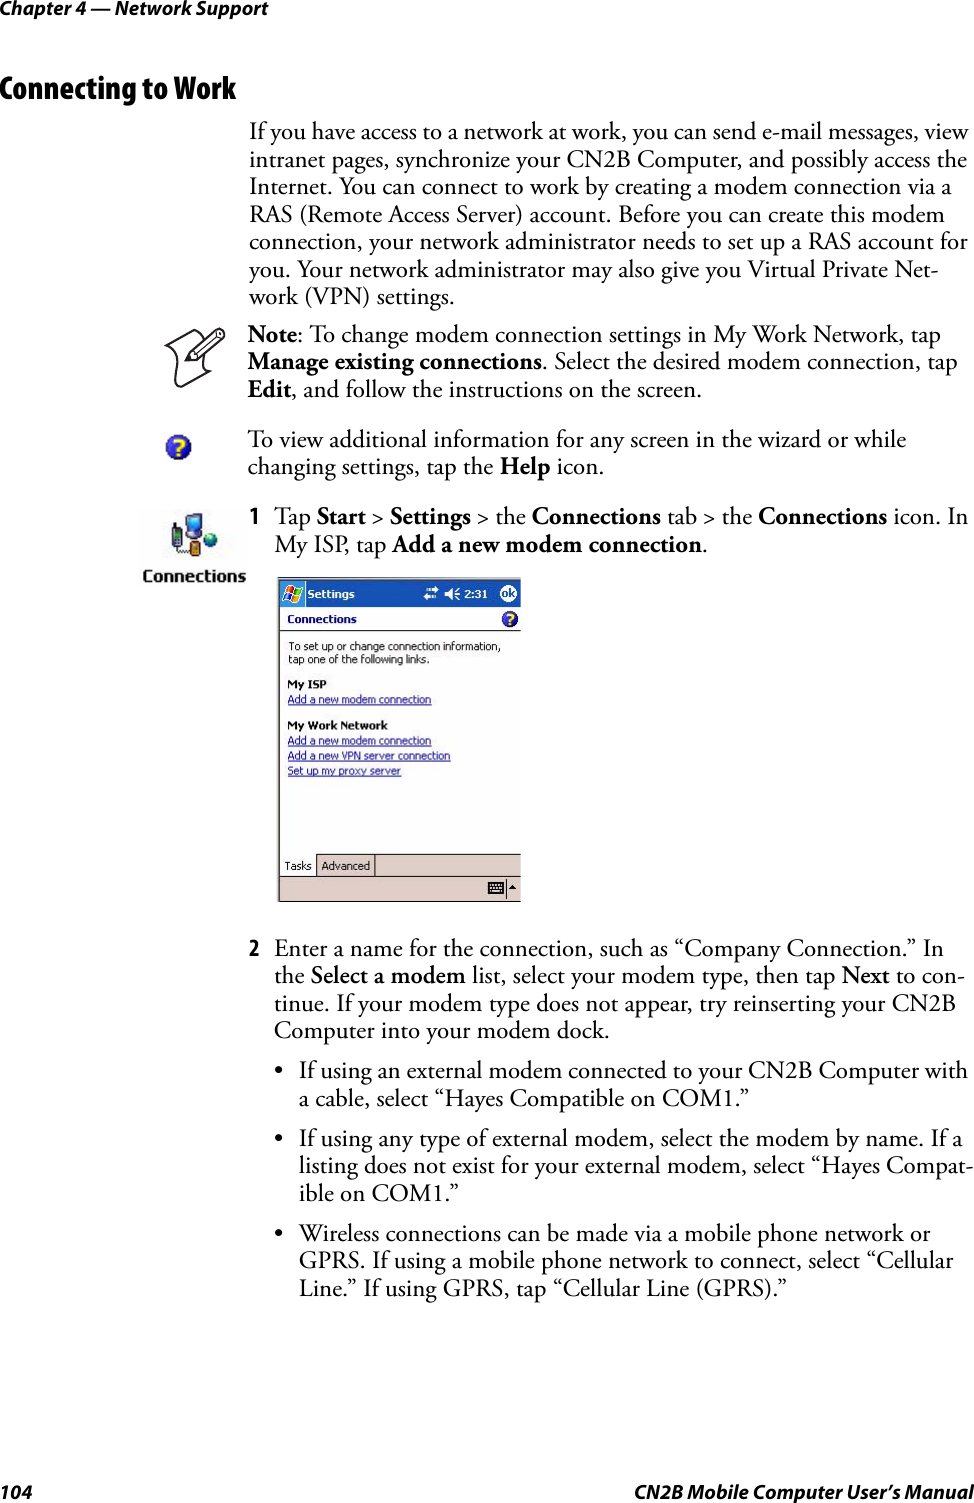 Chapter 4 — Network Support104 CN2B Mobile Computer User’s ManualConnecting to WorkIf you have access to a network at work, you can send e-mail messages, view intranet pages, synchronize your CN2B Computer, and possibly access the Internet. You can connect to work by creating a modem connection via a RAS (Remote Access Server) account. Before you can create this modem connection, your network administrator needs to set up a RAS account for you. Your network administrator may also give you Virtual Private Net-work (VPN) settings.2Enter a name for the connection, such as “Company Connection.” In the Select a modem list, select your modem type, then tap Next to con-tinue. If your modem type does not appear, try reinserting your CN2B Computer into your modem dock.• If using an external modem connected to your CN2B Computer with a cable, select “Hayes Compatible on COM1.”• If using any type of external modem, select the modem by name. If a listing does not exist for your external modem, select “Hayes Compat-ible on COM1.”• Wireless connections can be made via a mobile phone network or GPRS. If using a mobile phone network to connect, select “Cellular Line.” If using GPRS, tap “Cellular Line (GPRS).”Note: To change modem connection settings in My Work Network, tap Manage existing connections. Select the desired modem connection, tap Edit, and follow the instructions on the screen.To view additional information for any screen in the wizard or while changing settings, tap the Help icon.1Tap Start &gt; Settings &gt; the Connections tab &gt; the Connections icon. In My ISP, tap Add a new modem connection.